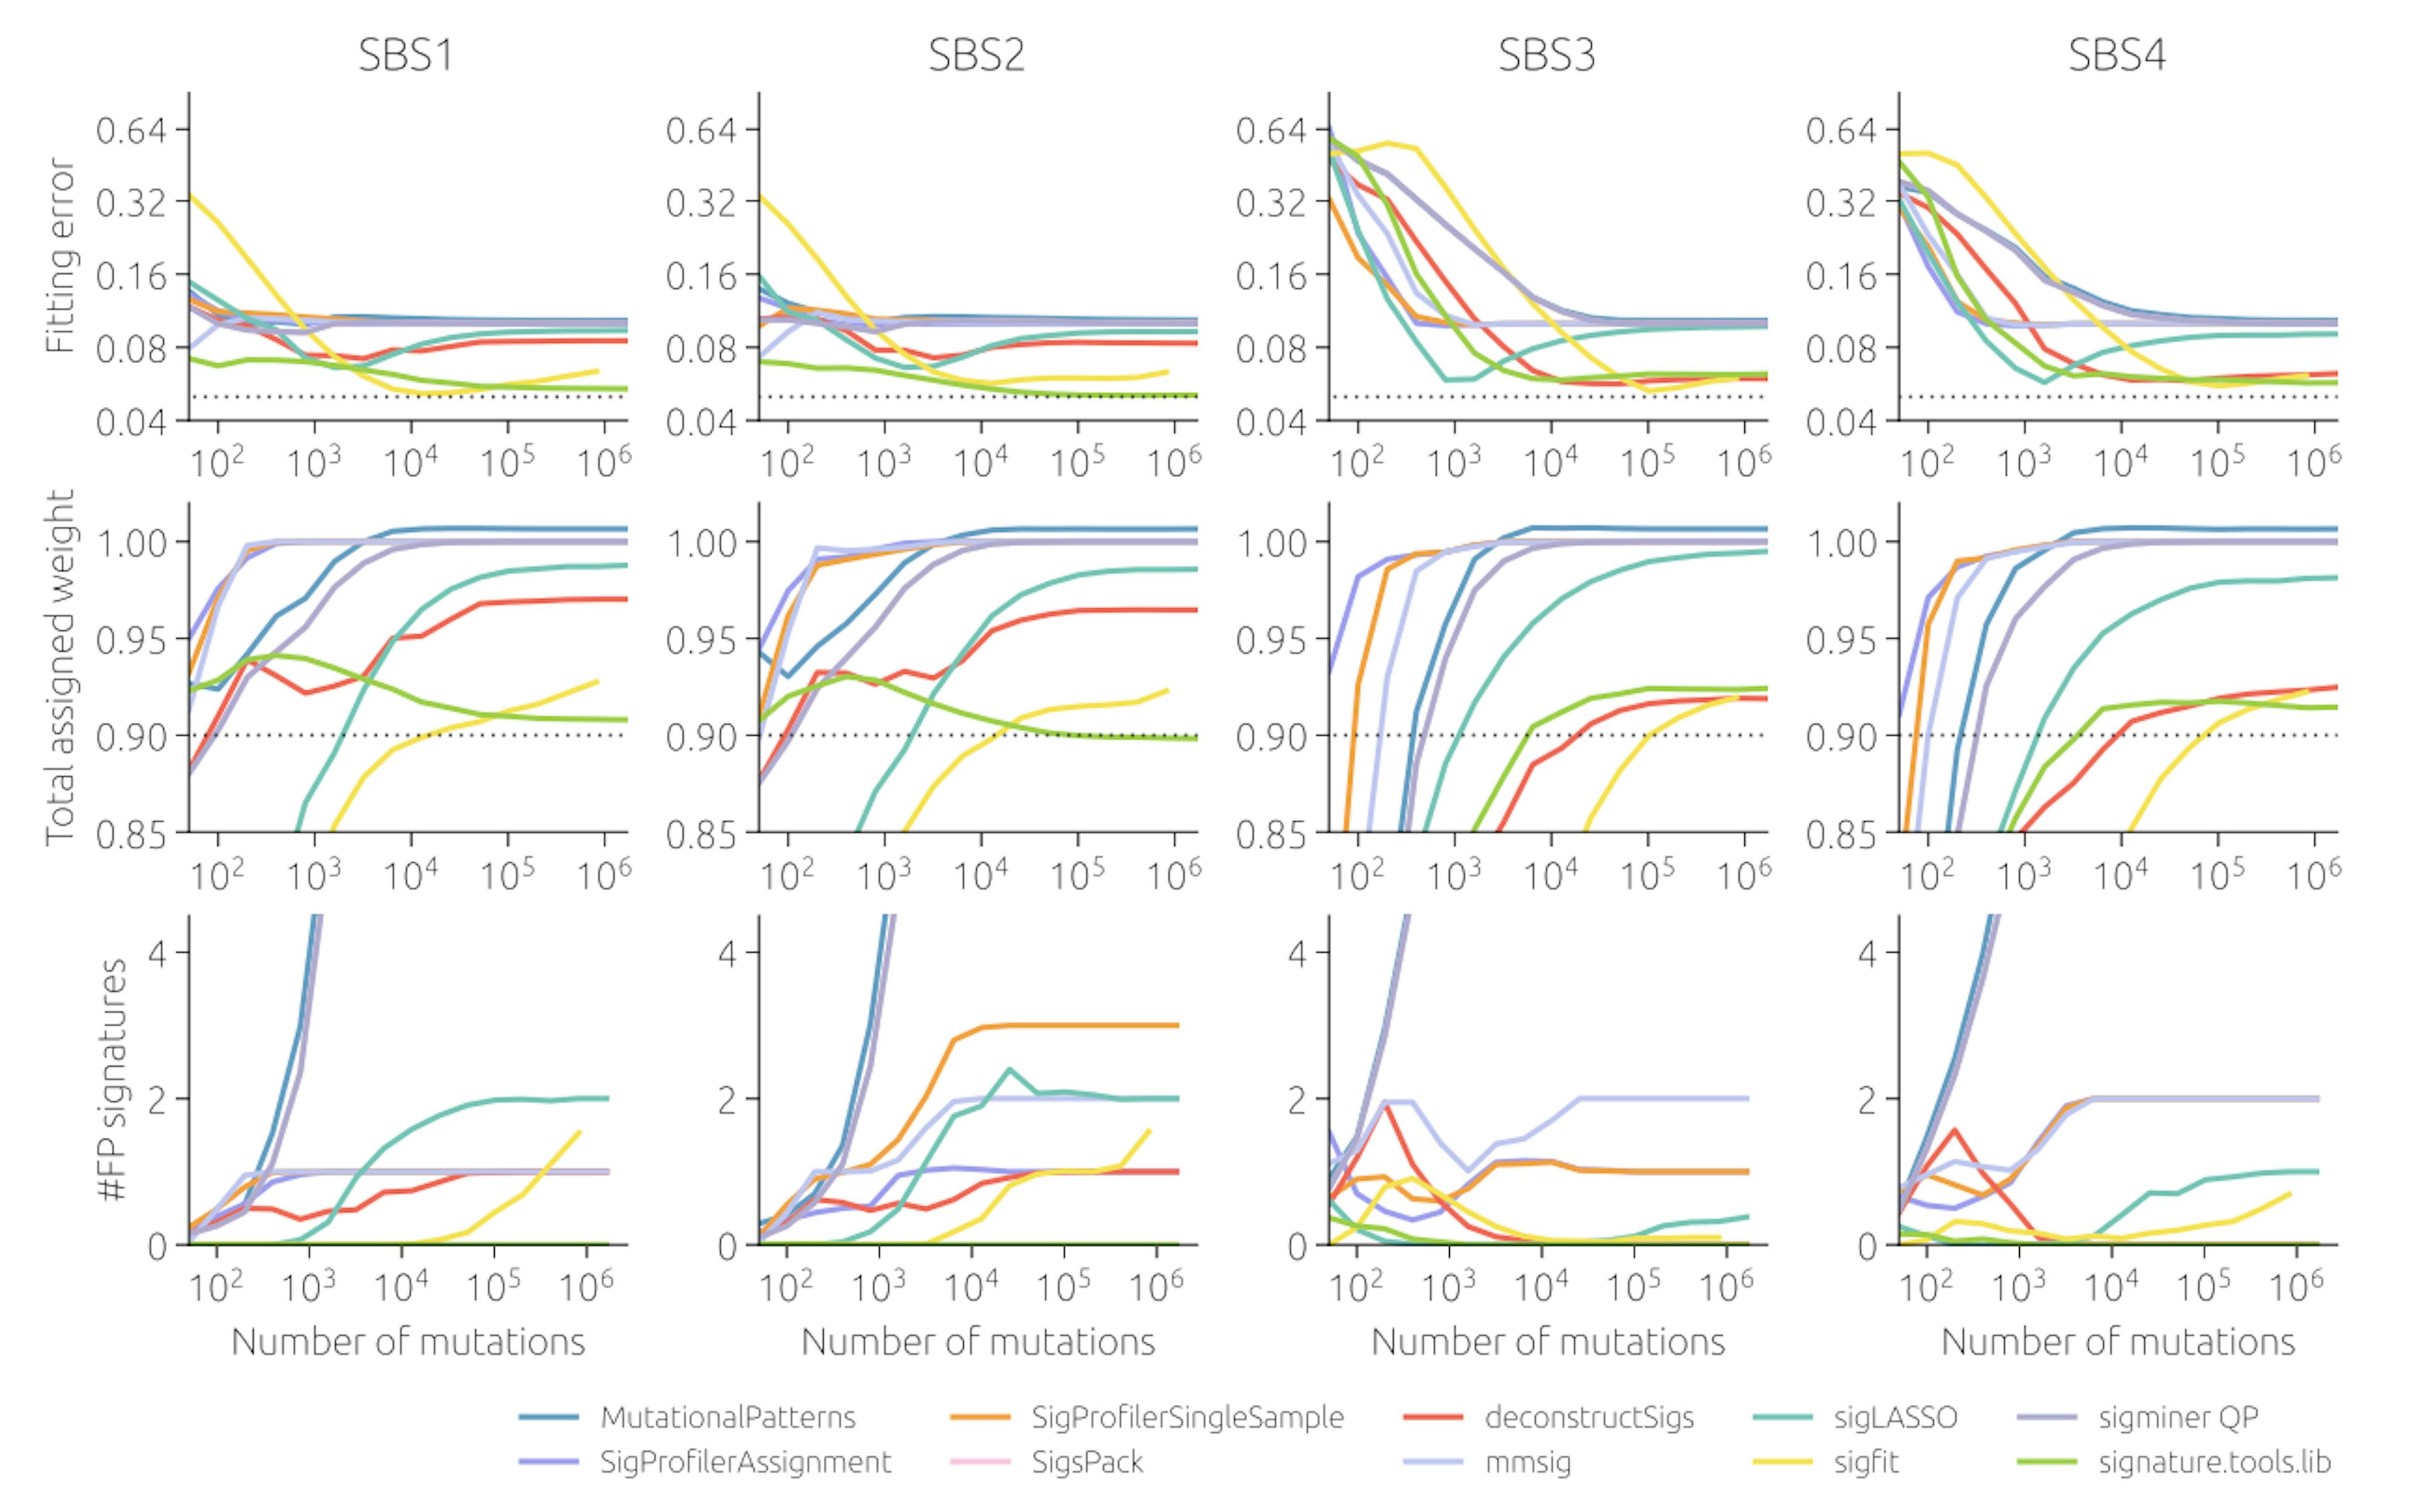 Supplementary Figure 16: A comparison of signature fitting tools for cohorts where 90% of mutations come from onesignature (four columns corresponding to SBS1–4 being used as the main signature) and 10% of mutations come from